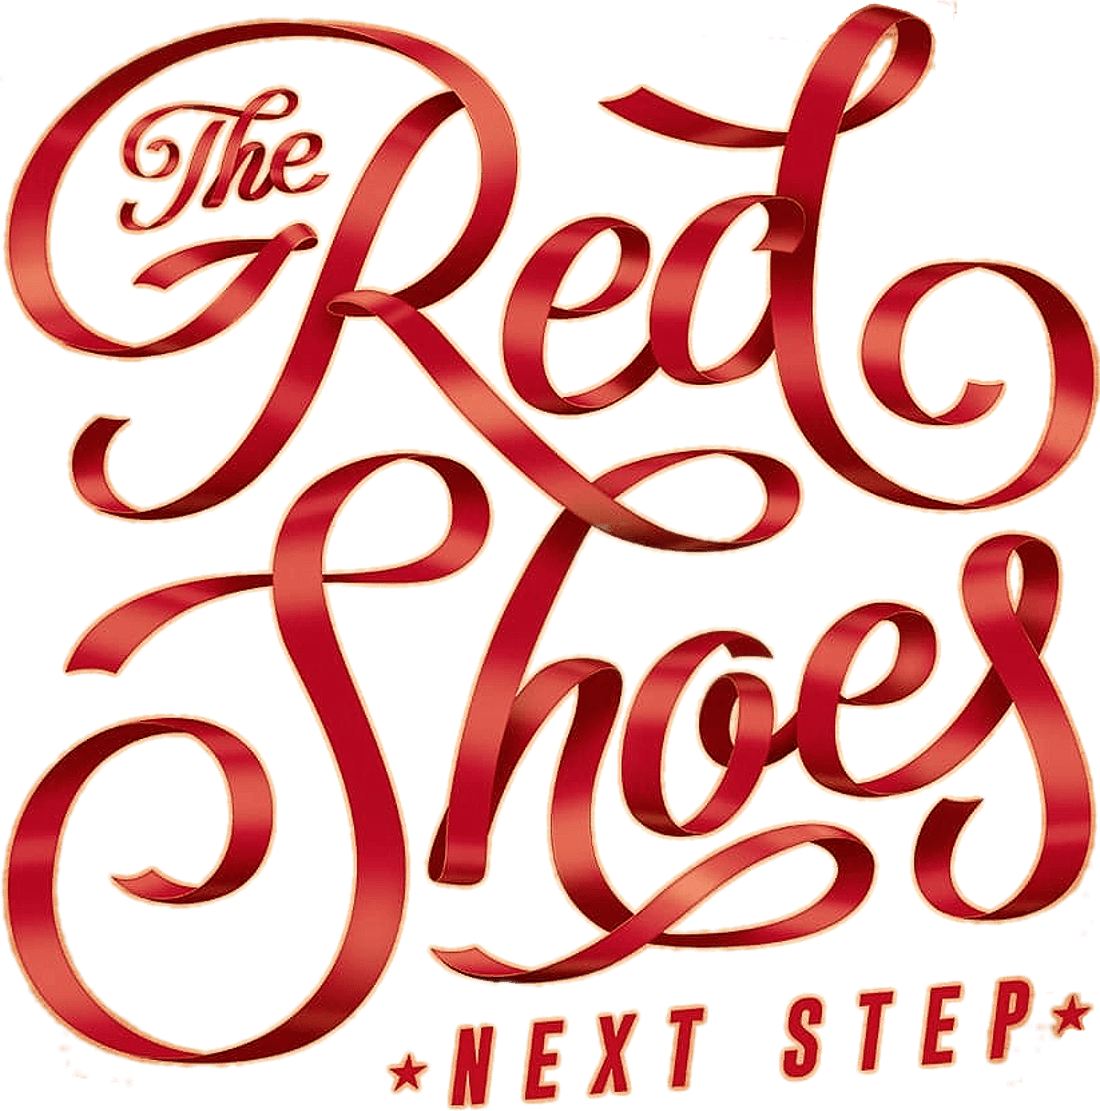 The Red Shoes: Next Step logo